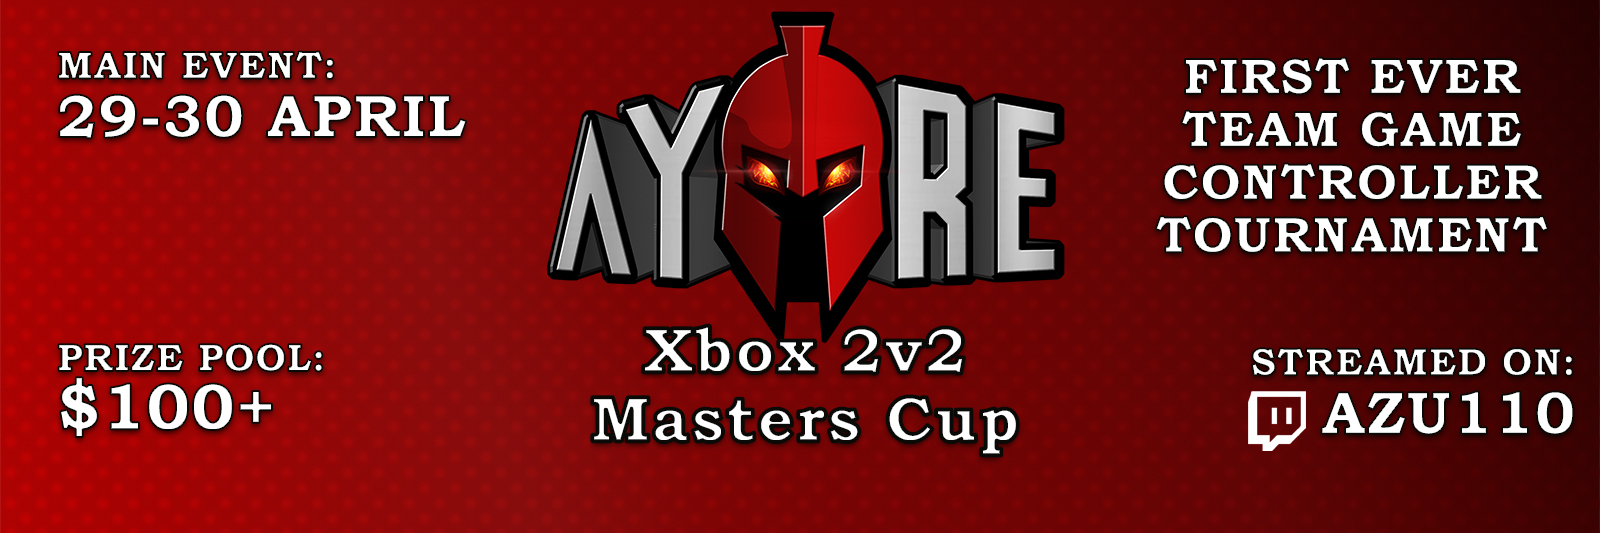 Ayre Xbox 2v2 Masters Cup Banner.jpg